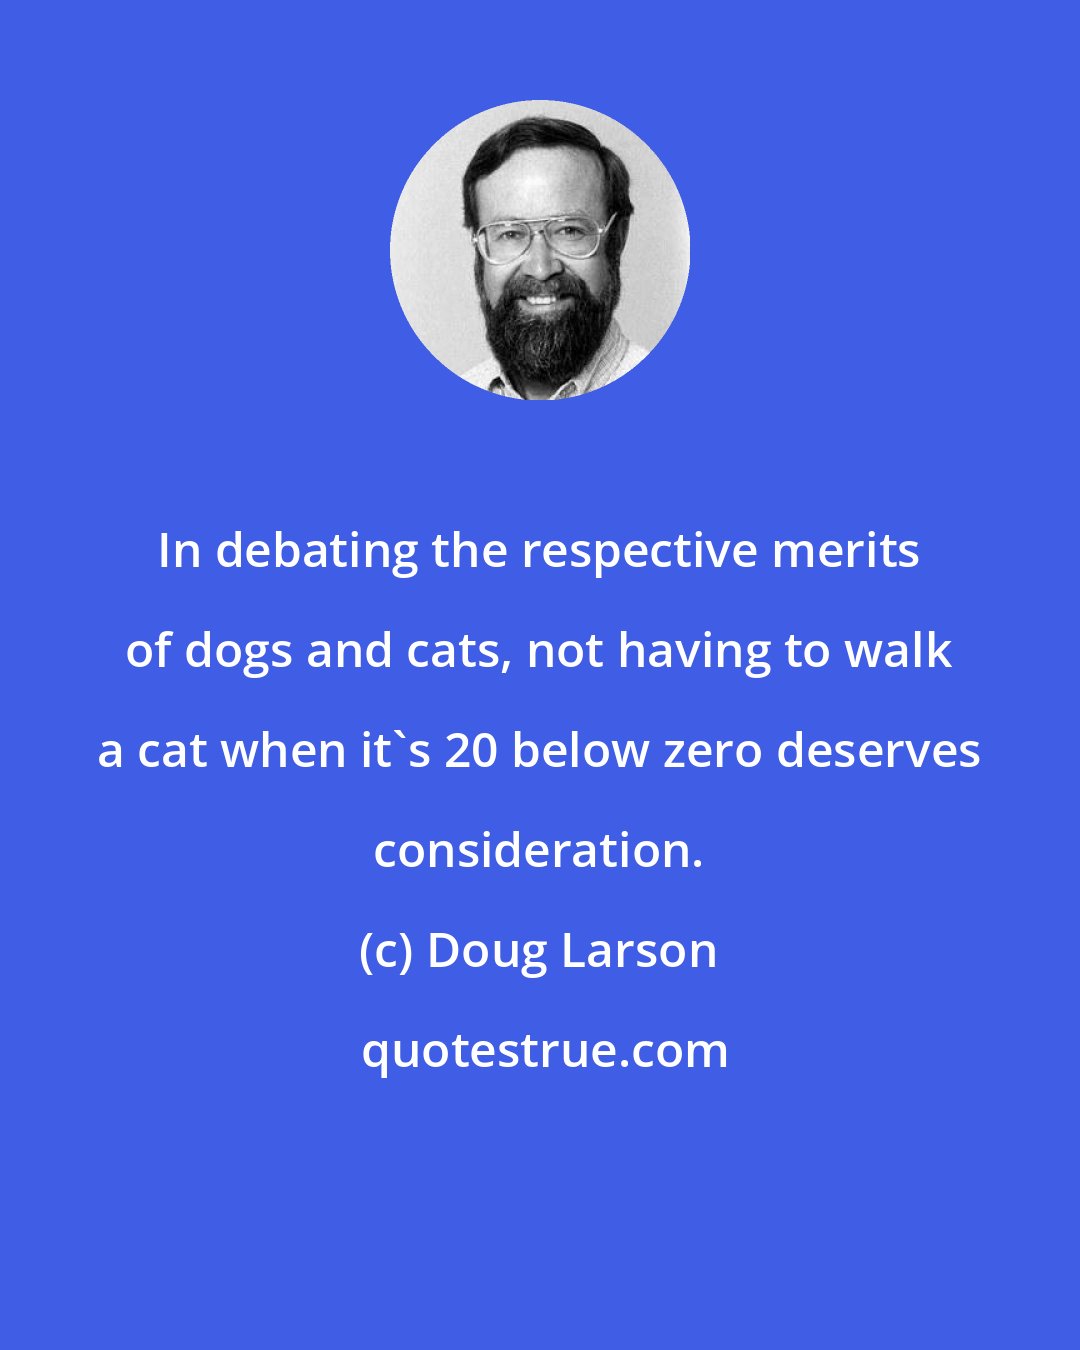 Doug Larson: In debating the respective merits of dogs and cats, not having to walk a cat when it's 20 below zero deserves consideration.